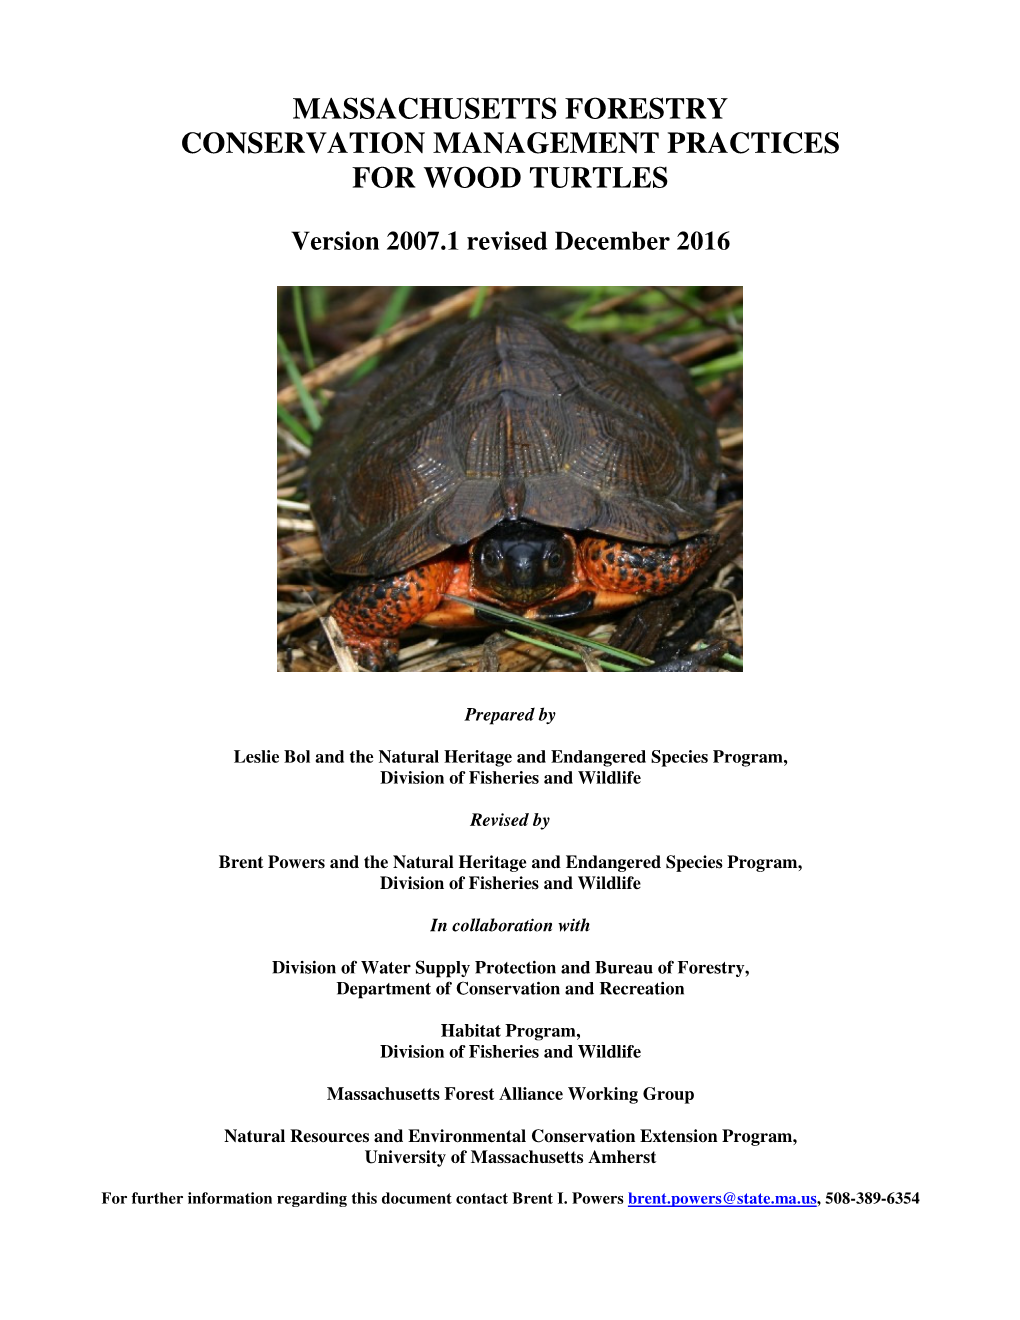 Massachusetts Forestry Conservation Management Practices for Wood Turtles